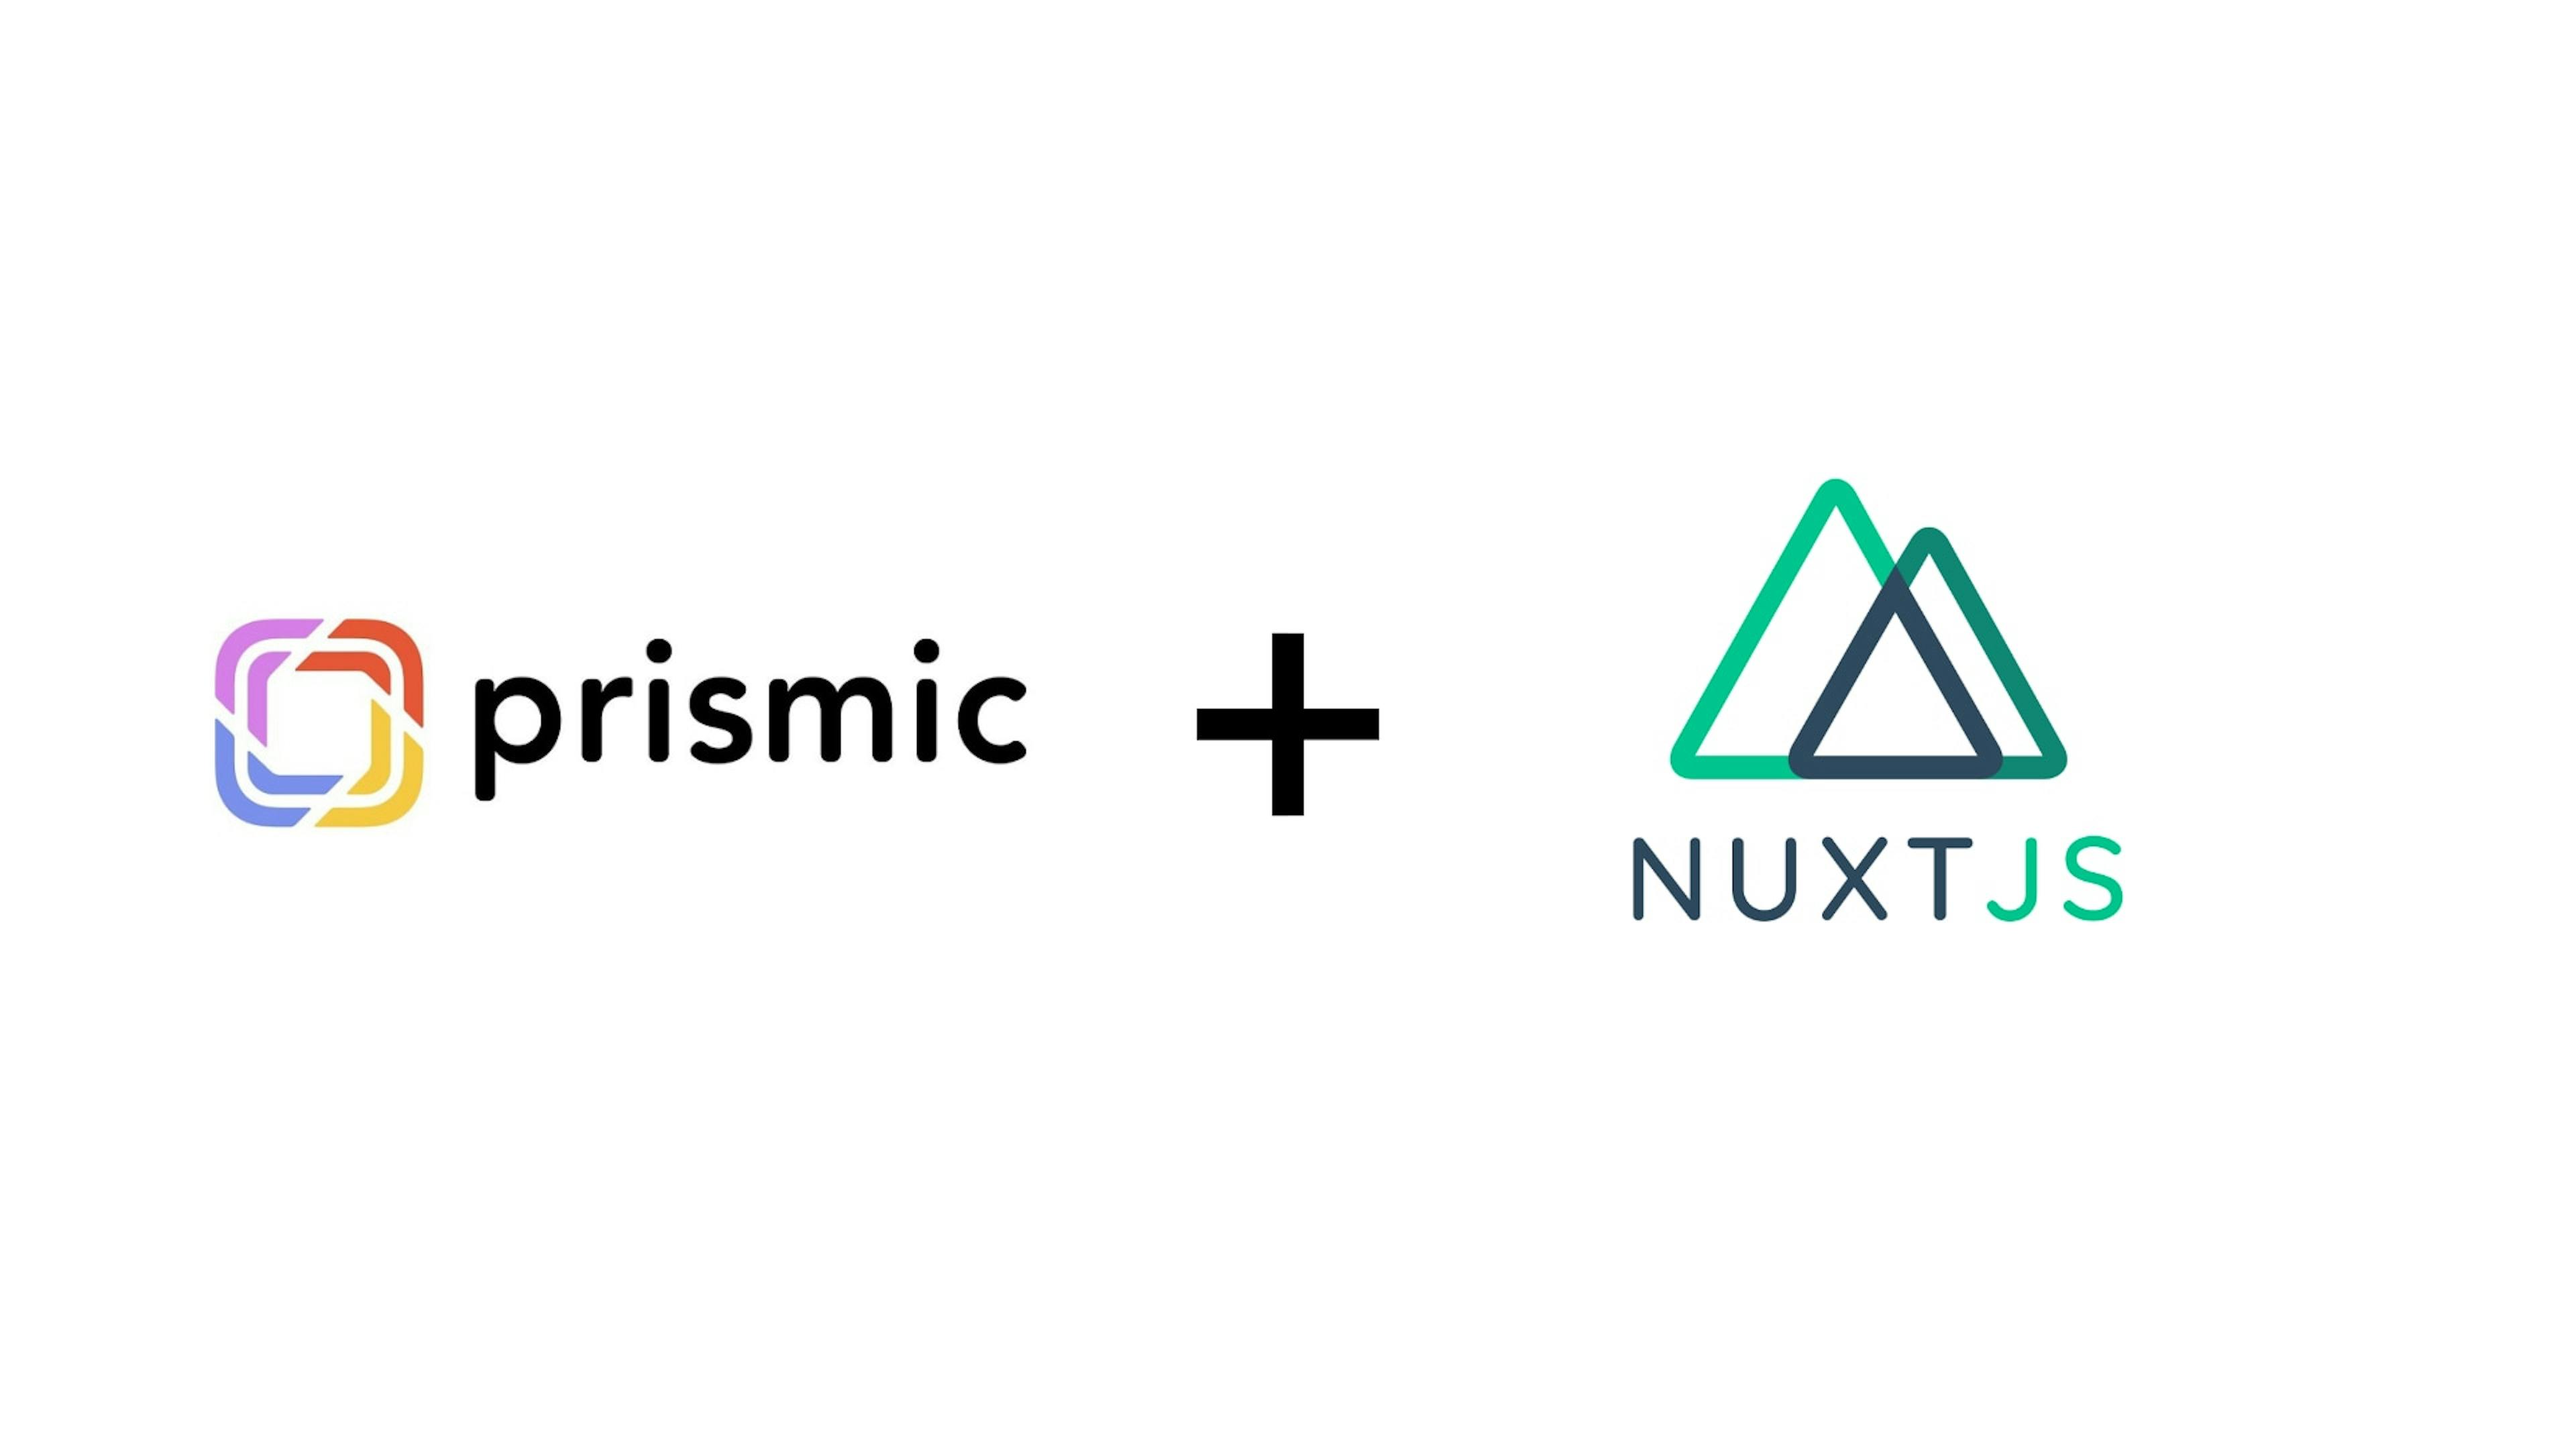 prismic.io and nuxt.js logos together